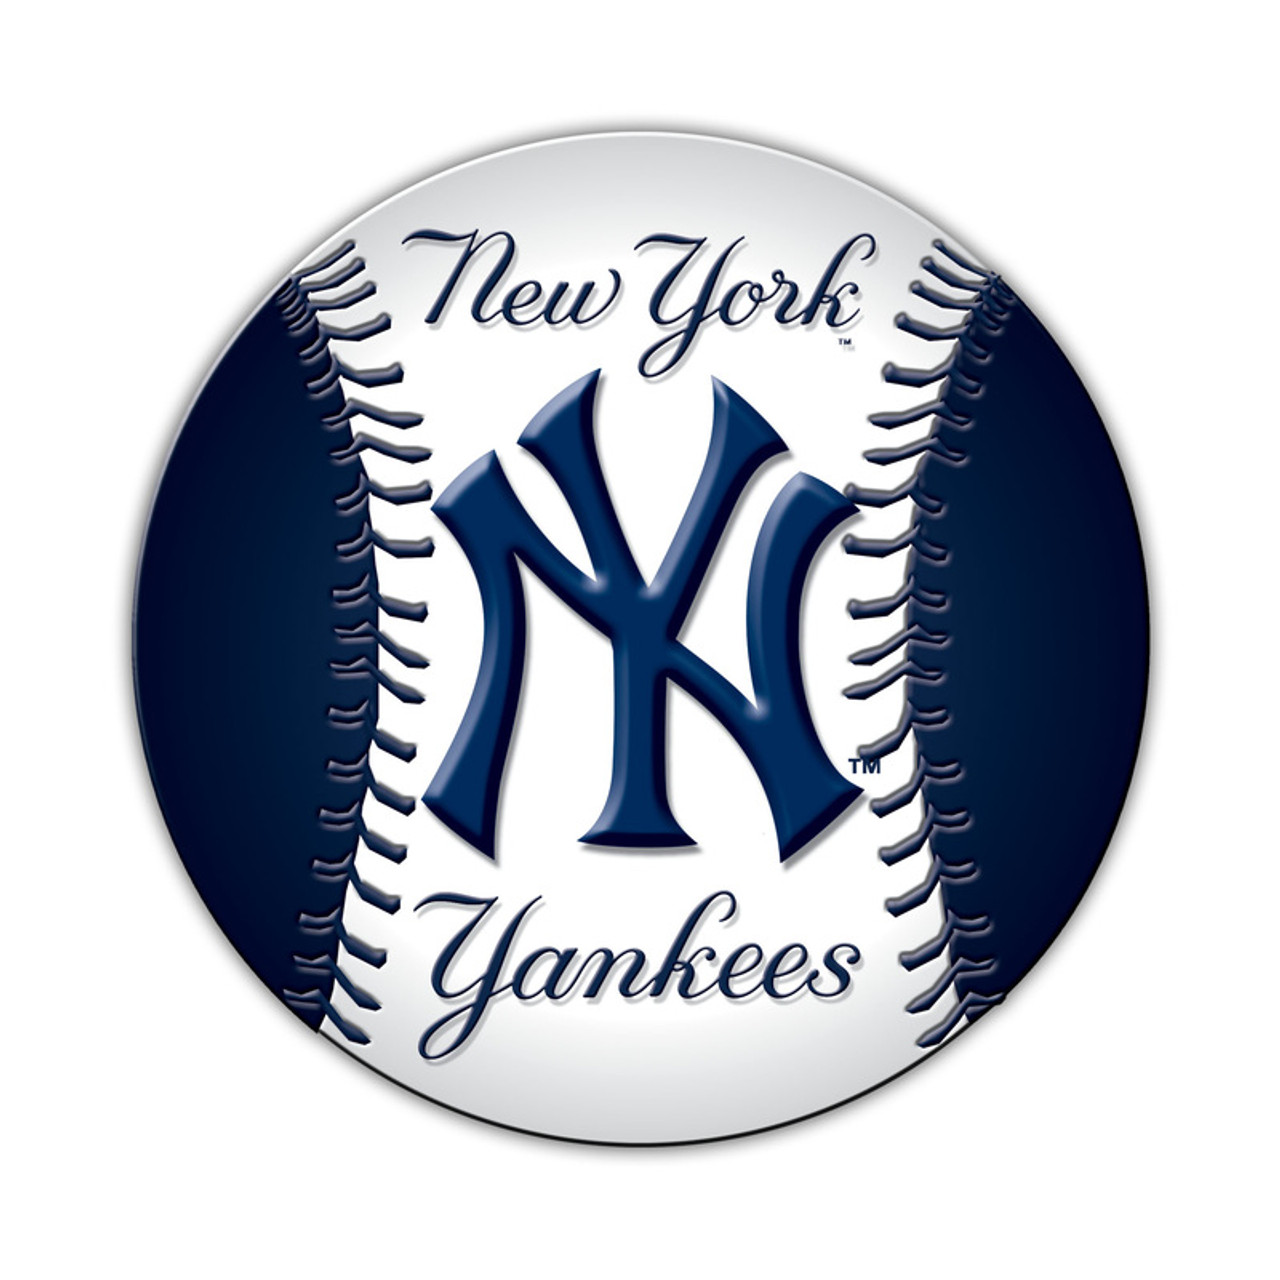 New York Yankees Fanatics Branded Dubliner Personalized Name